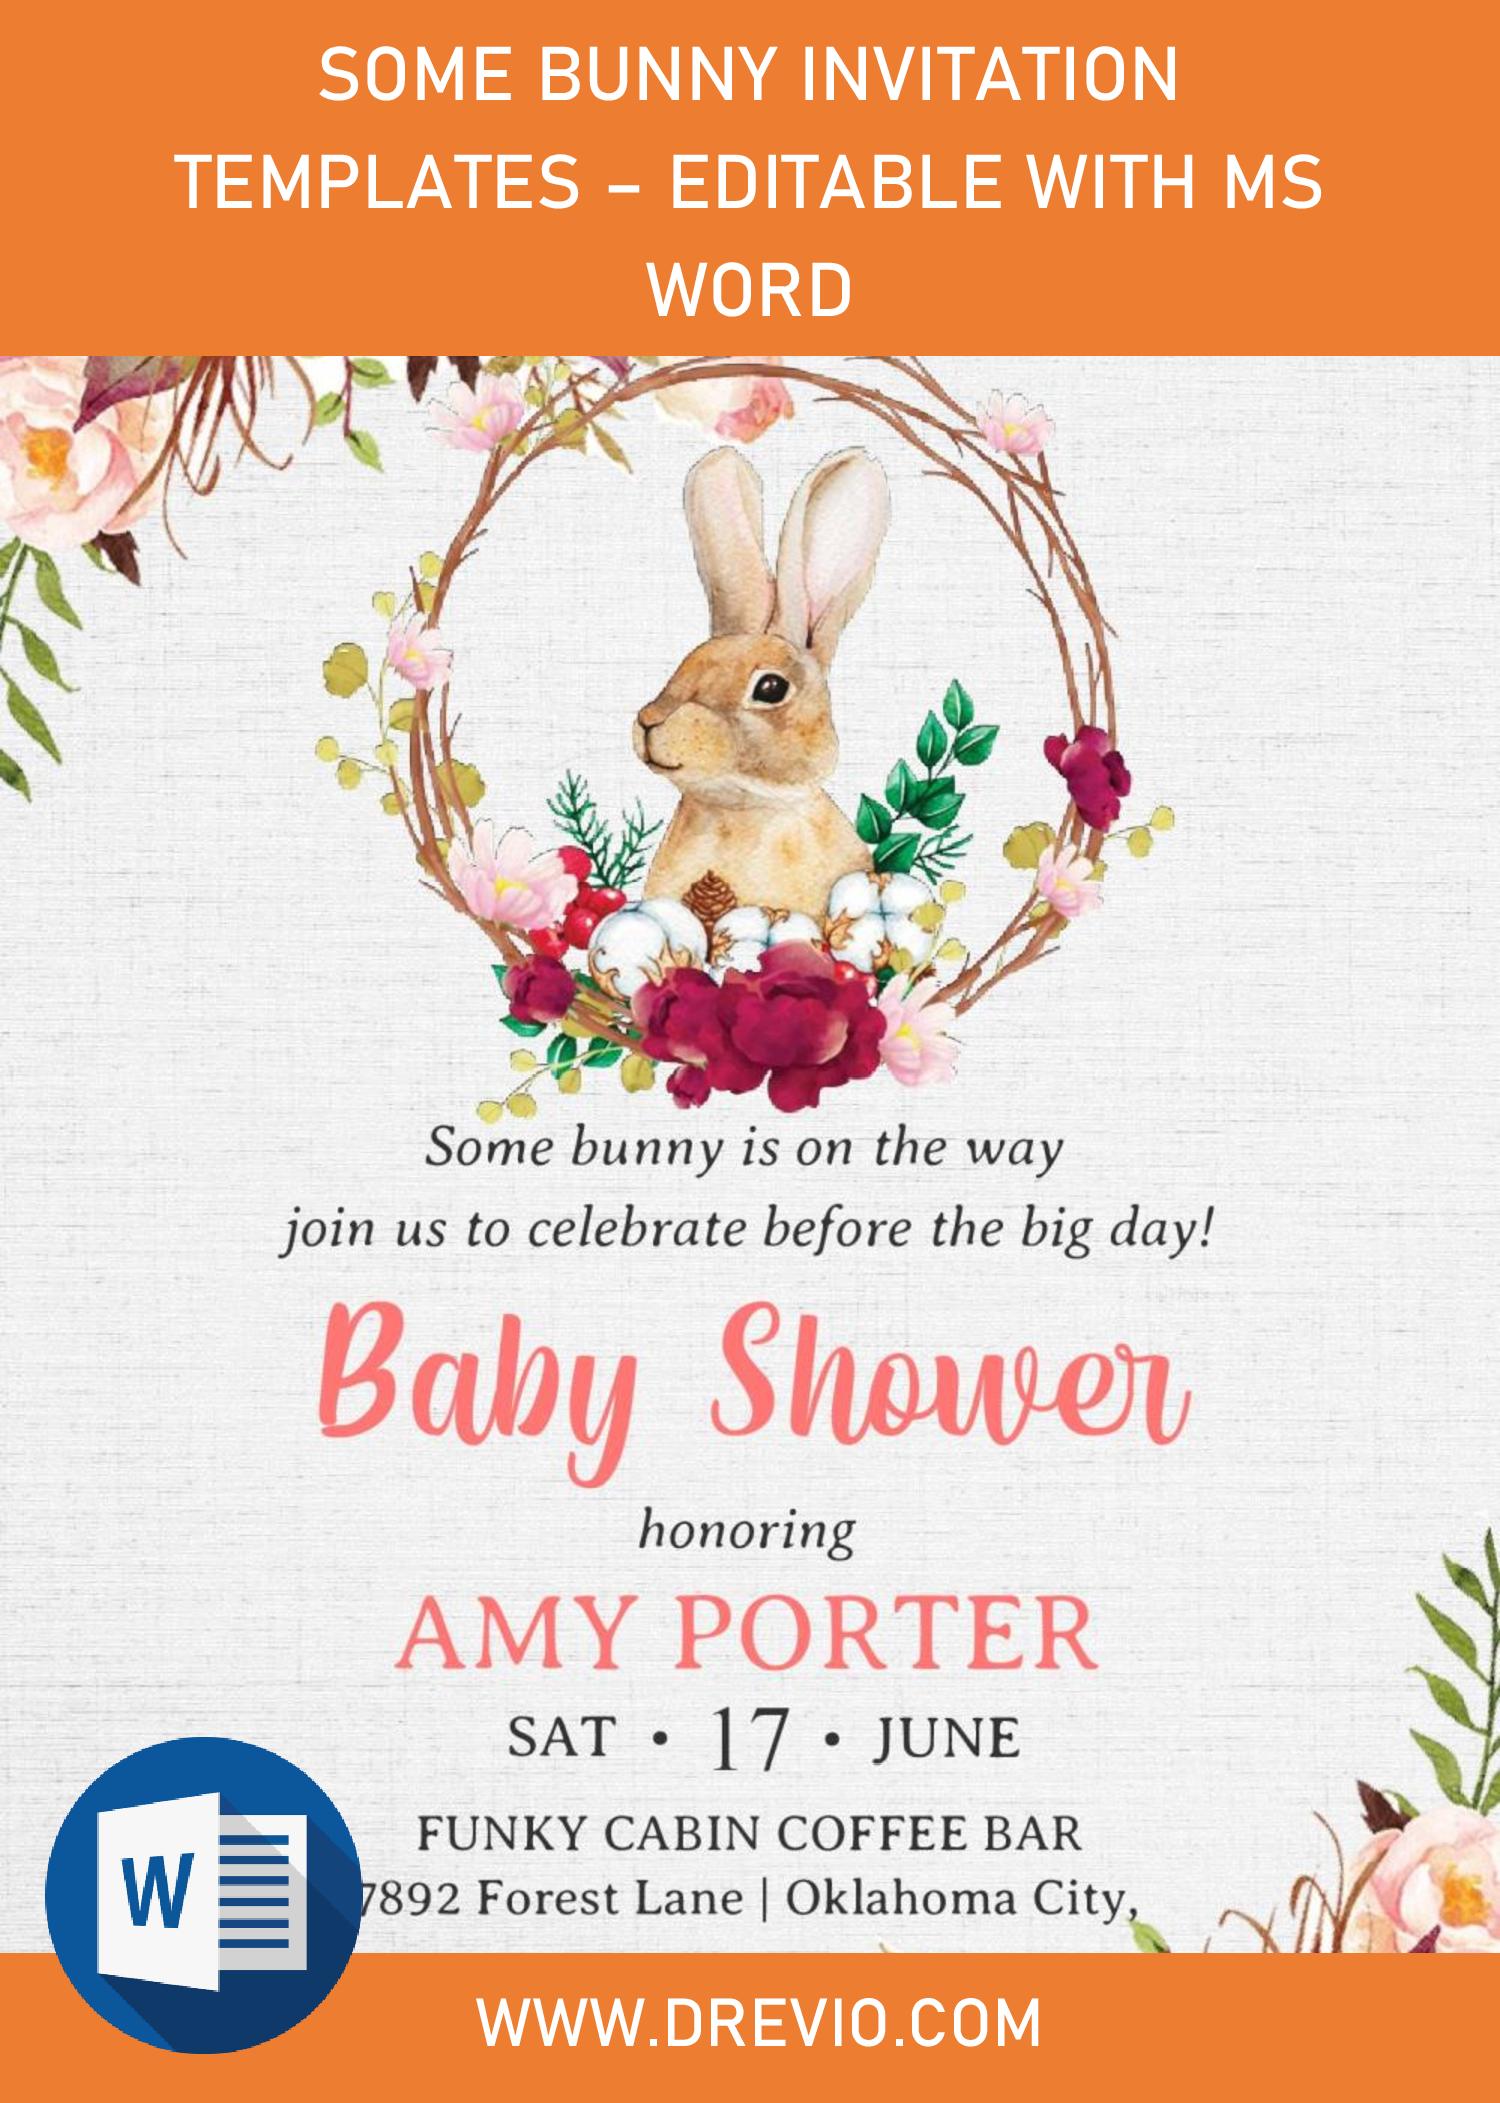 Some Bunny Invitation Templates - Editable With MS Word | | Download Hundreds FREE PRINTABLE ...